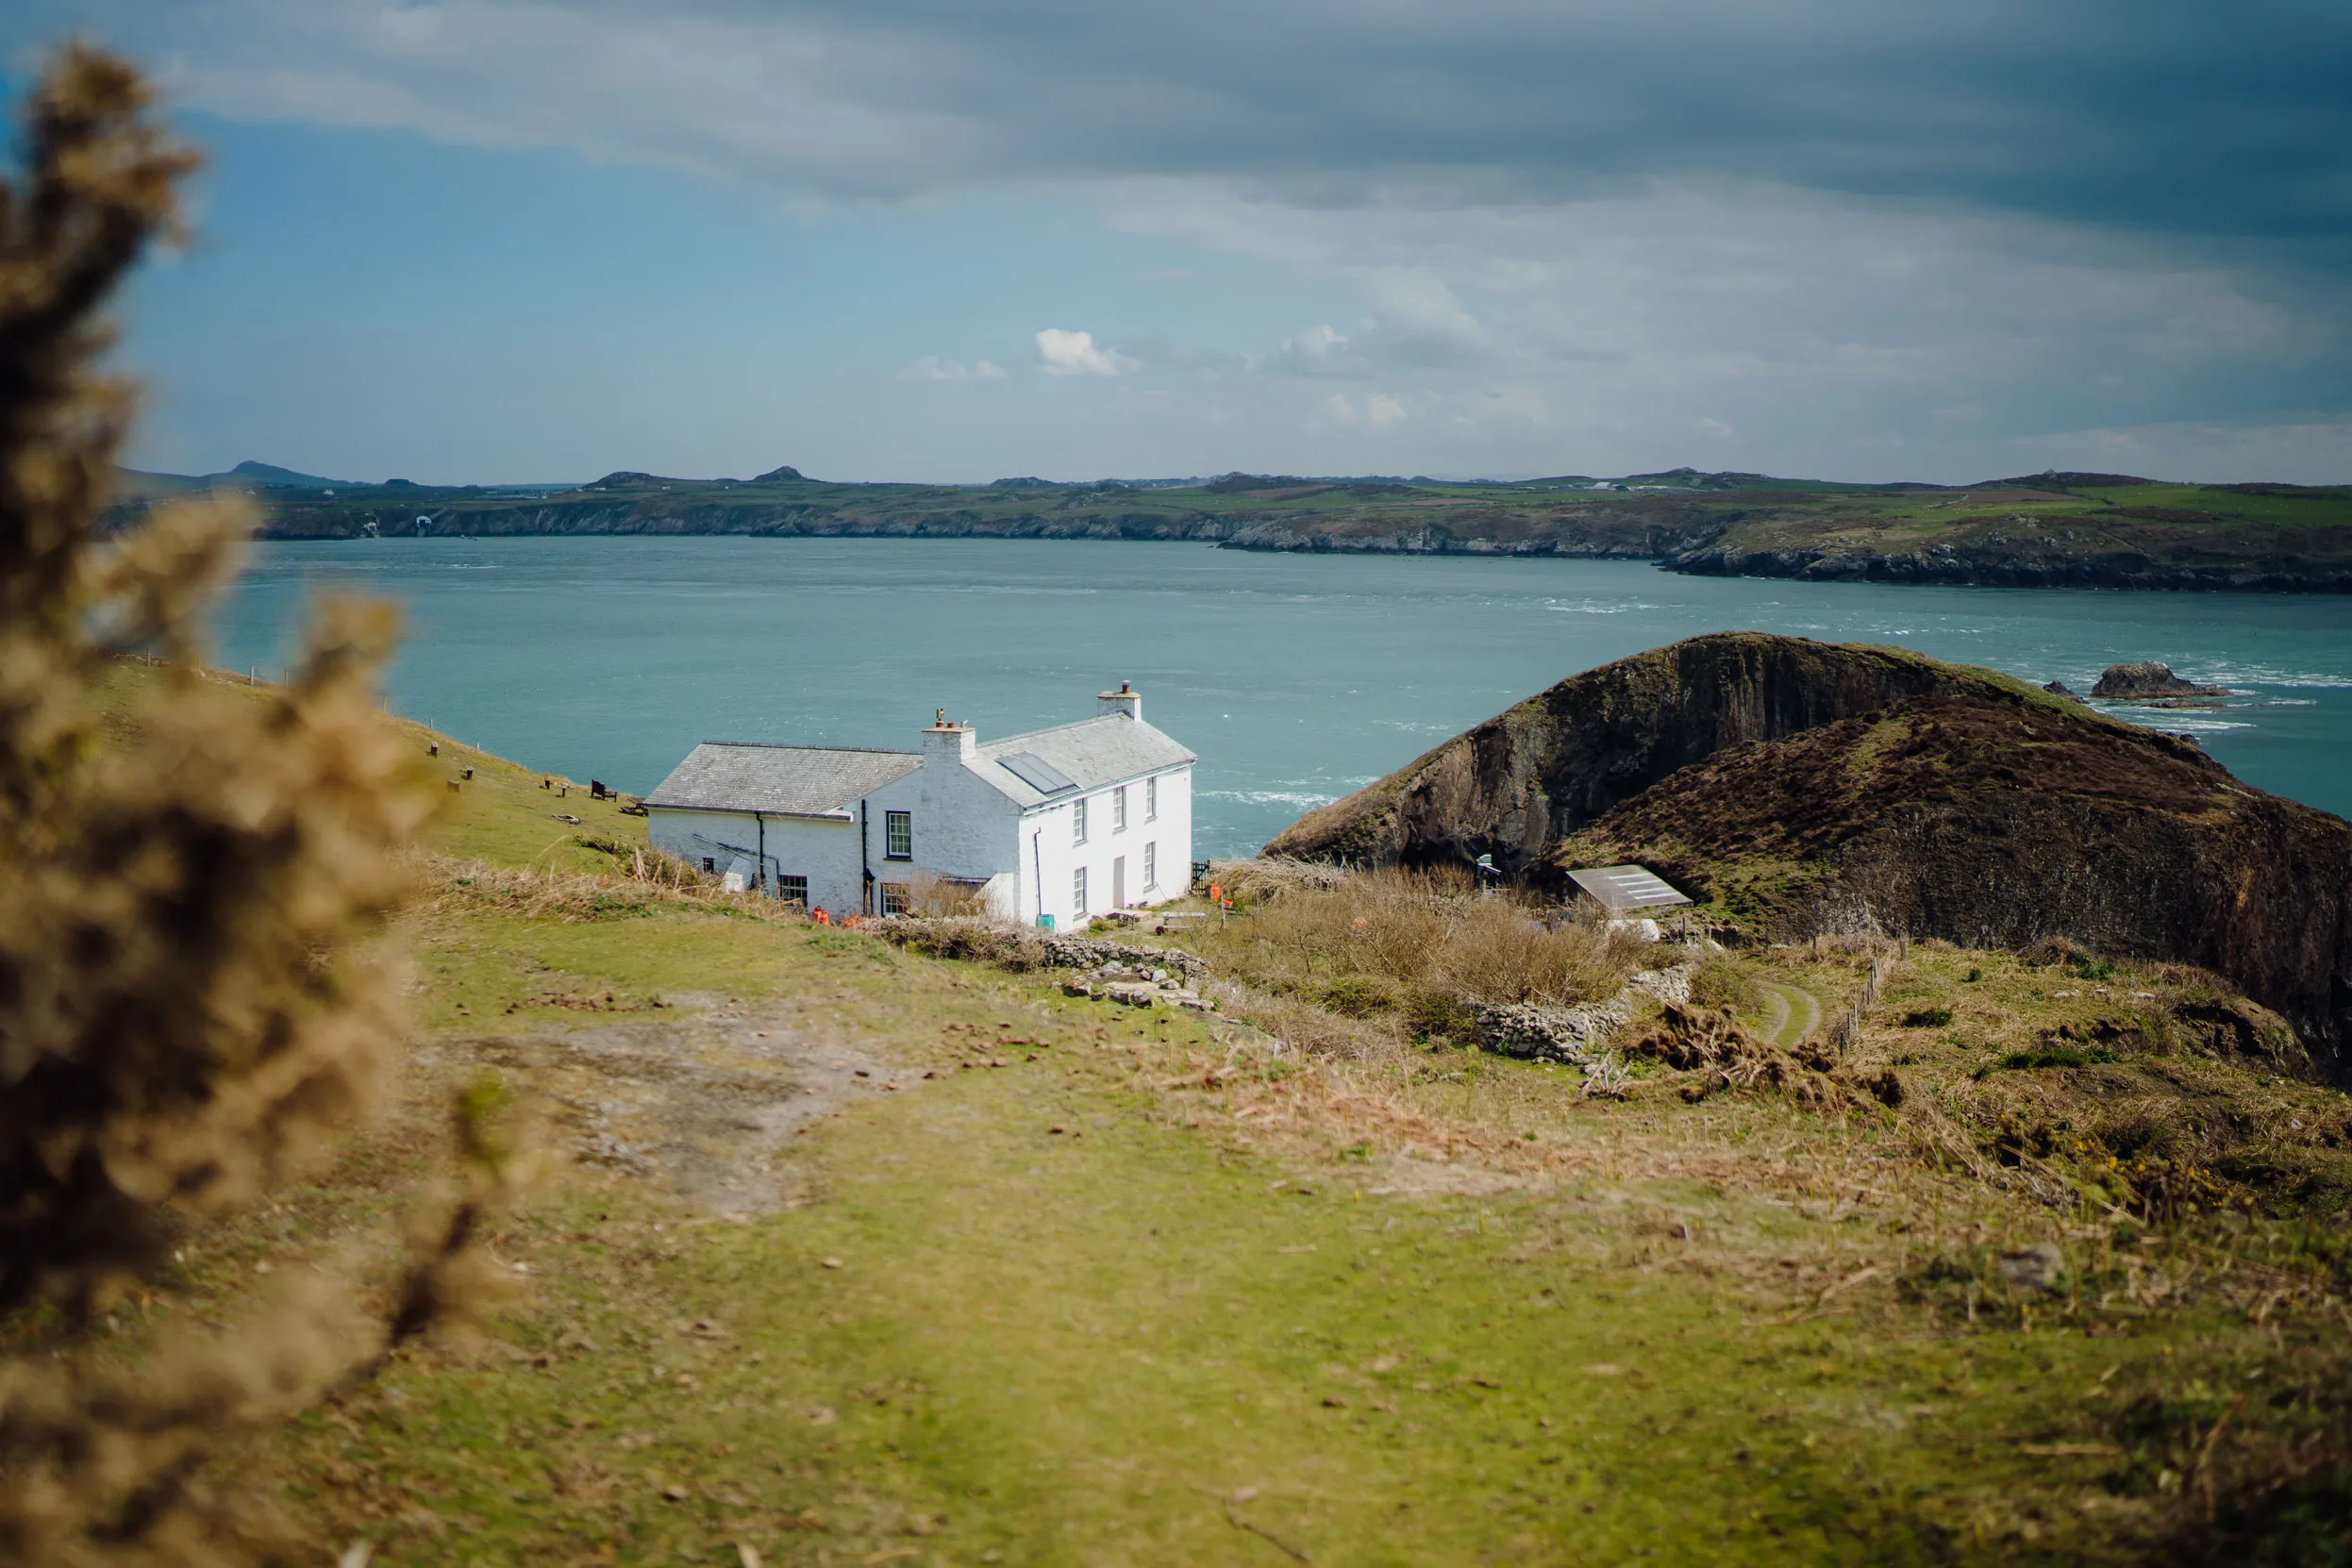 A painted white, stone building, on the edge of Ramsay island with a view looking out to sea.